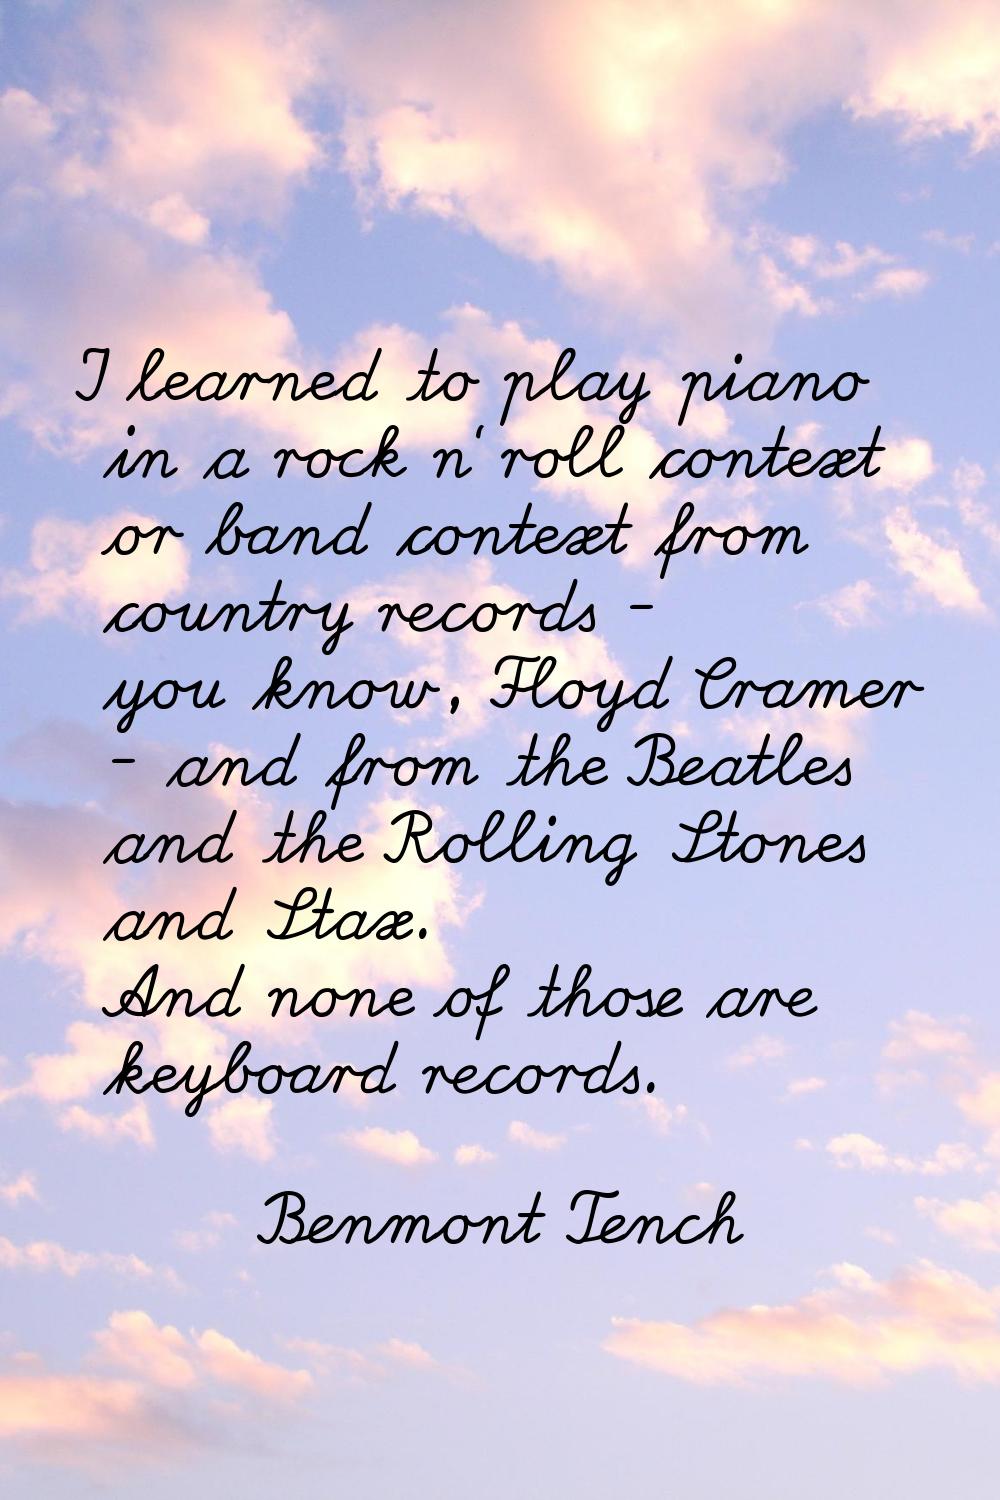 I learned to play piano in a rock n' roll context or band context from country records - you know, 